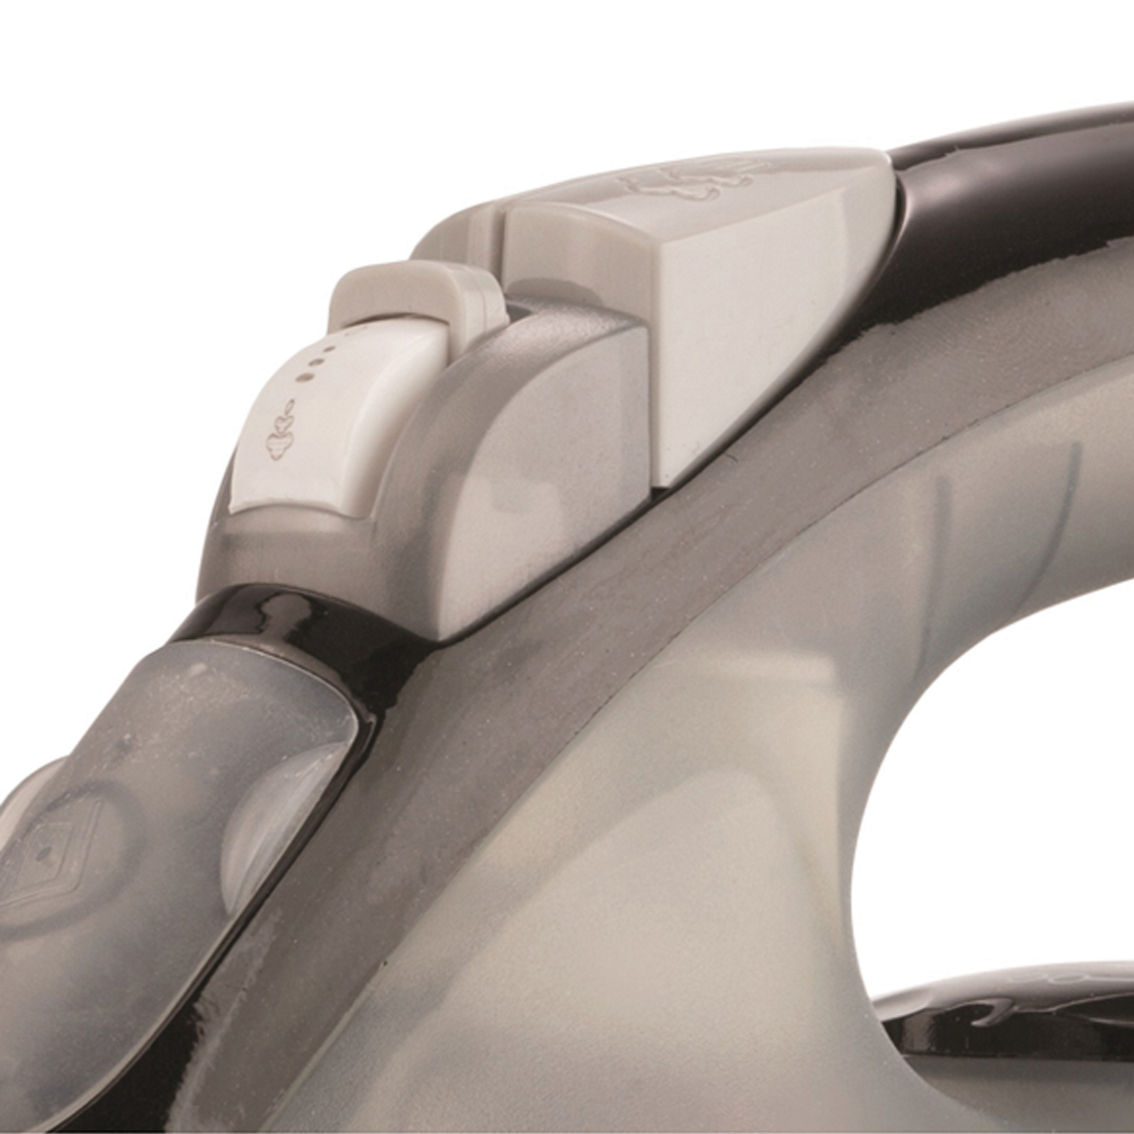 Brentwood Nonstick Steam Iron - Image 8 of 10